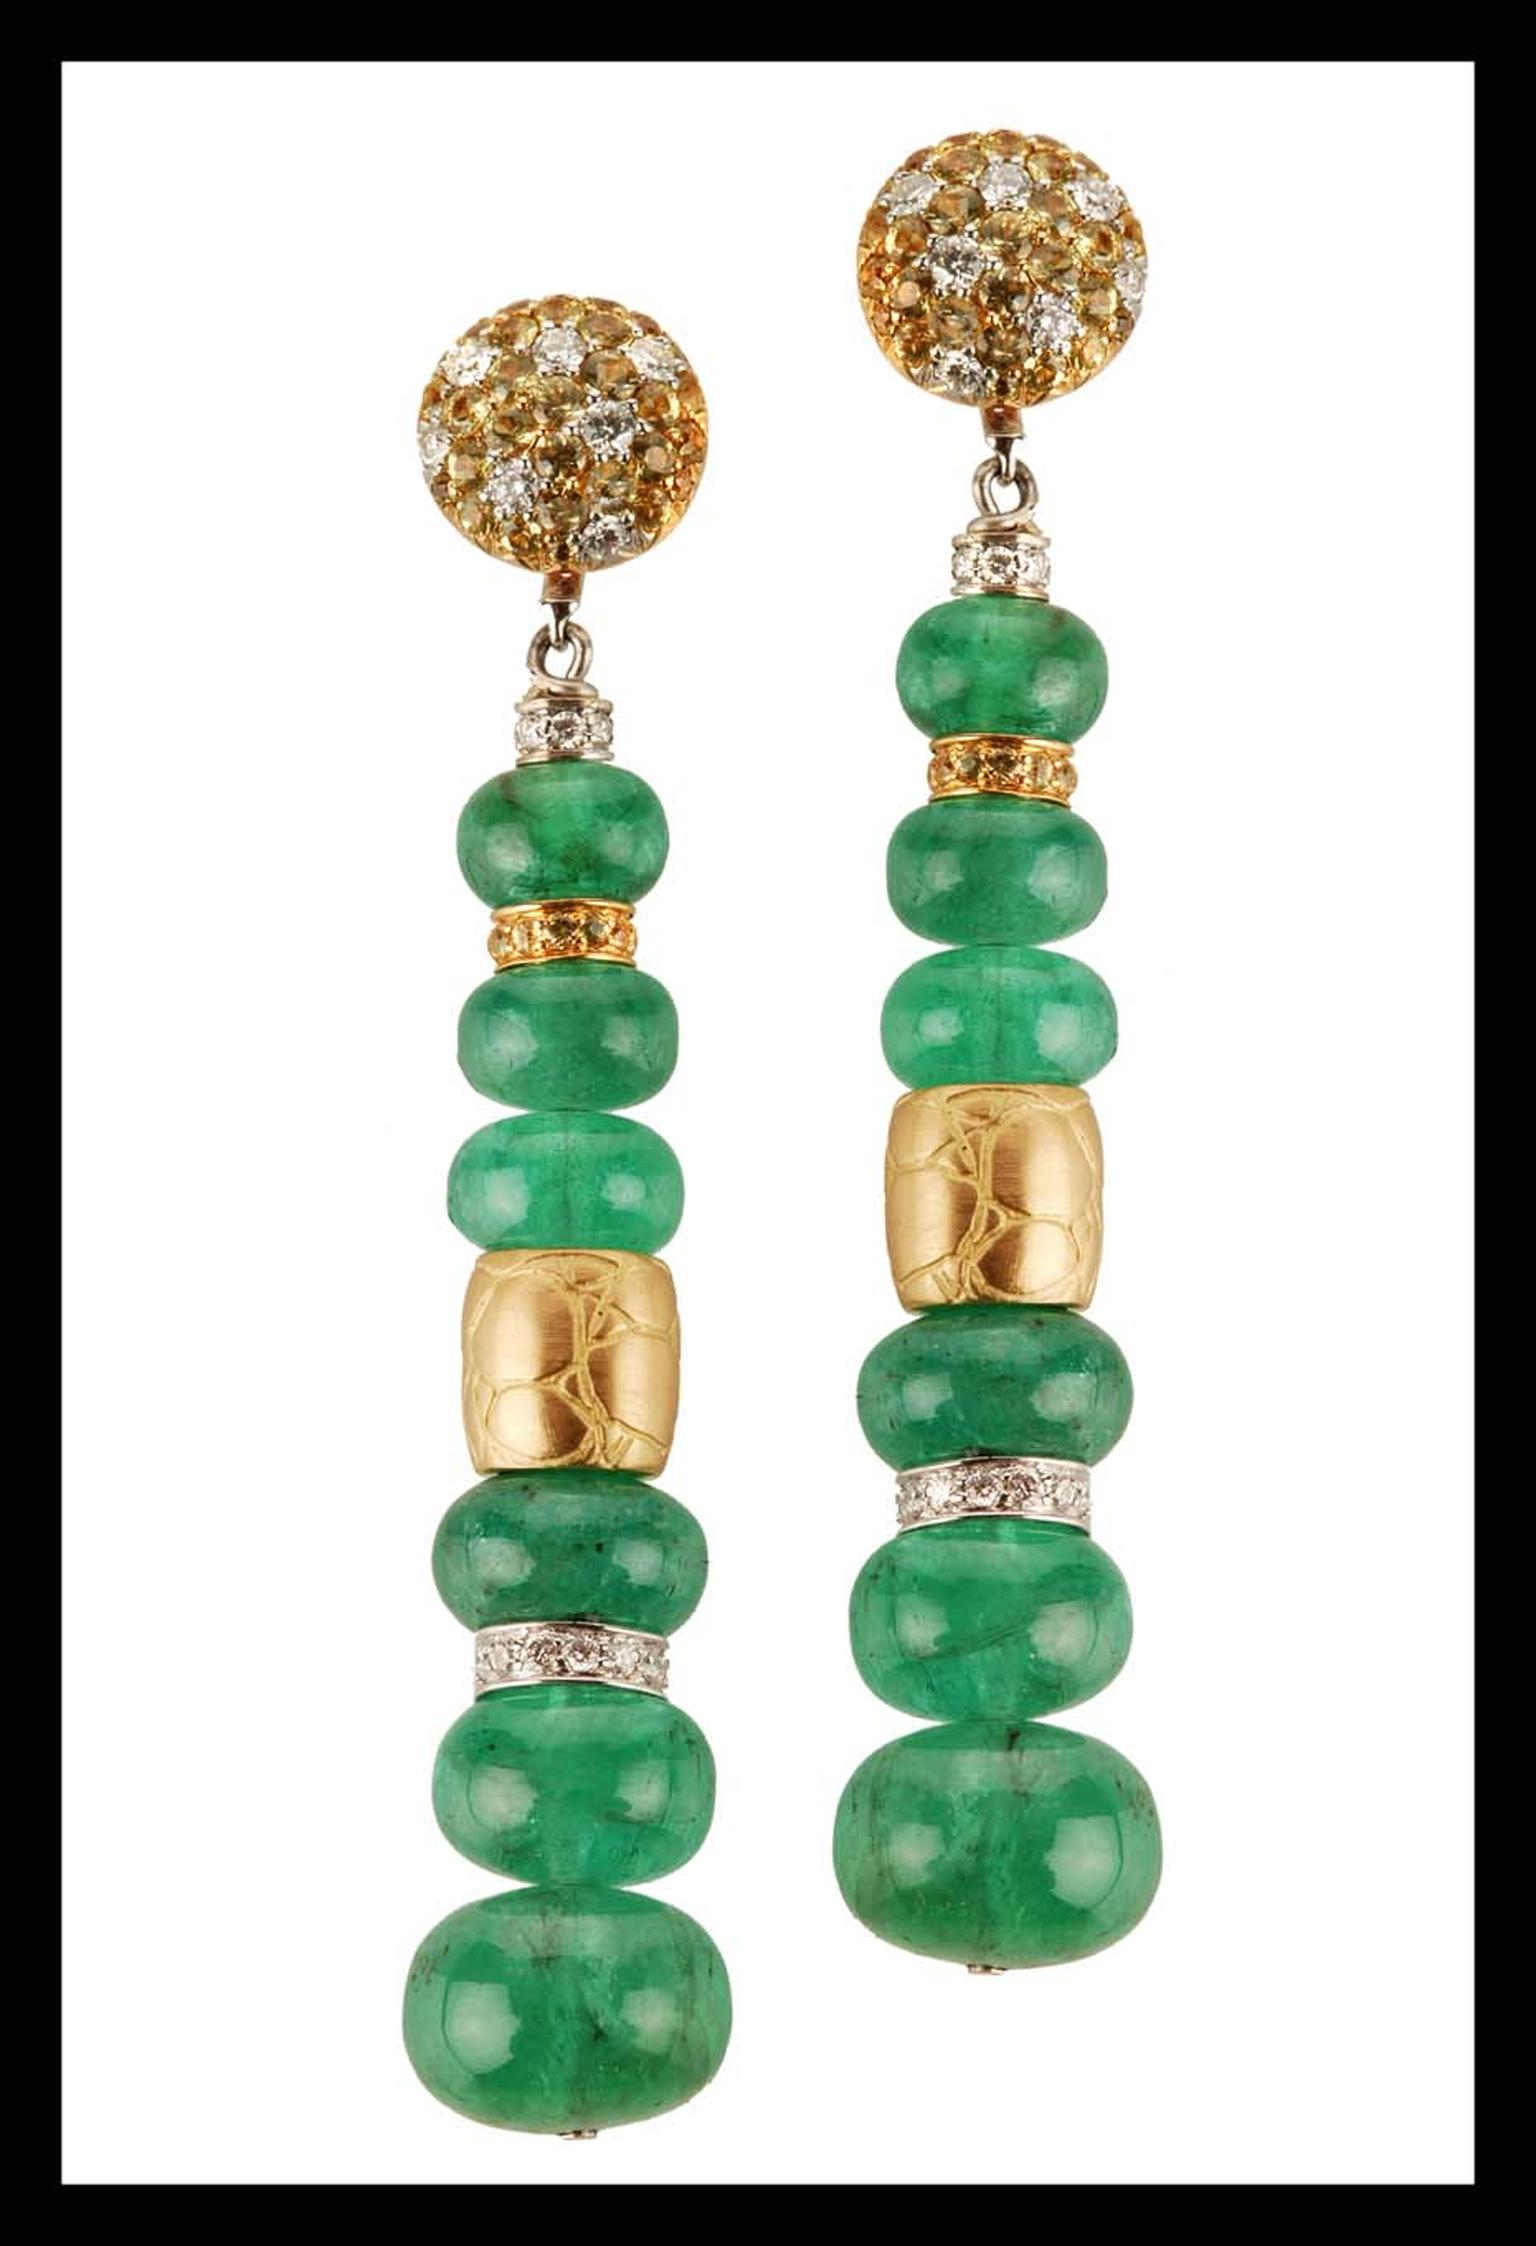 Elena C one-of-a-kind long emerald earrings with mini gold coconut textured barrels, yellow sapphires and diamonds (9,900€).